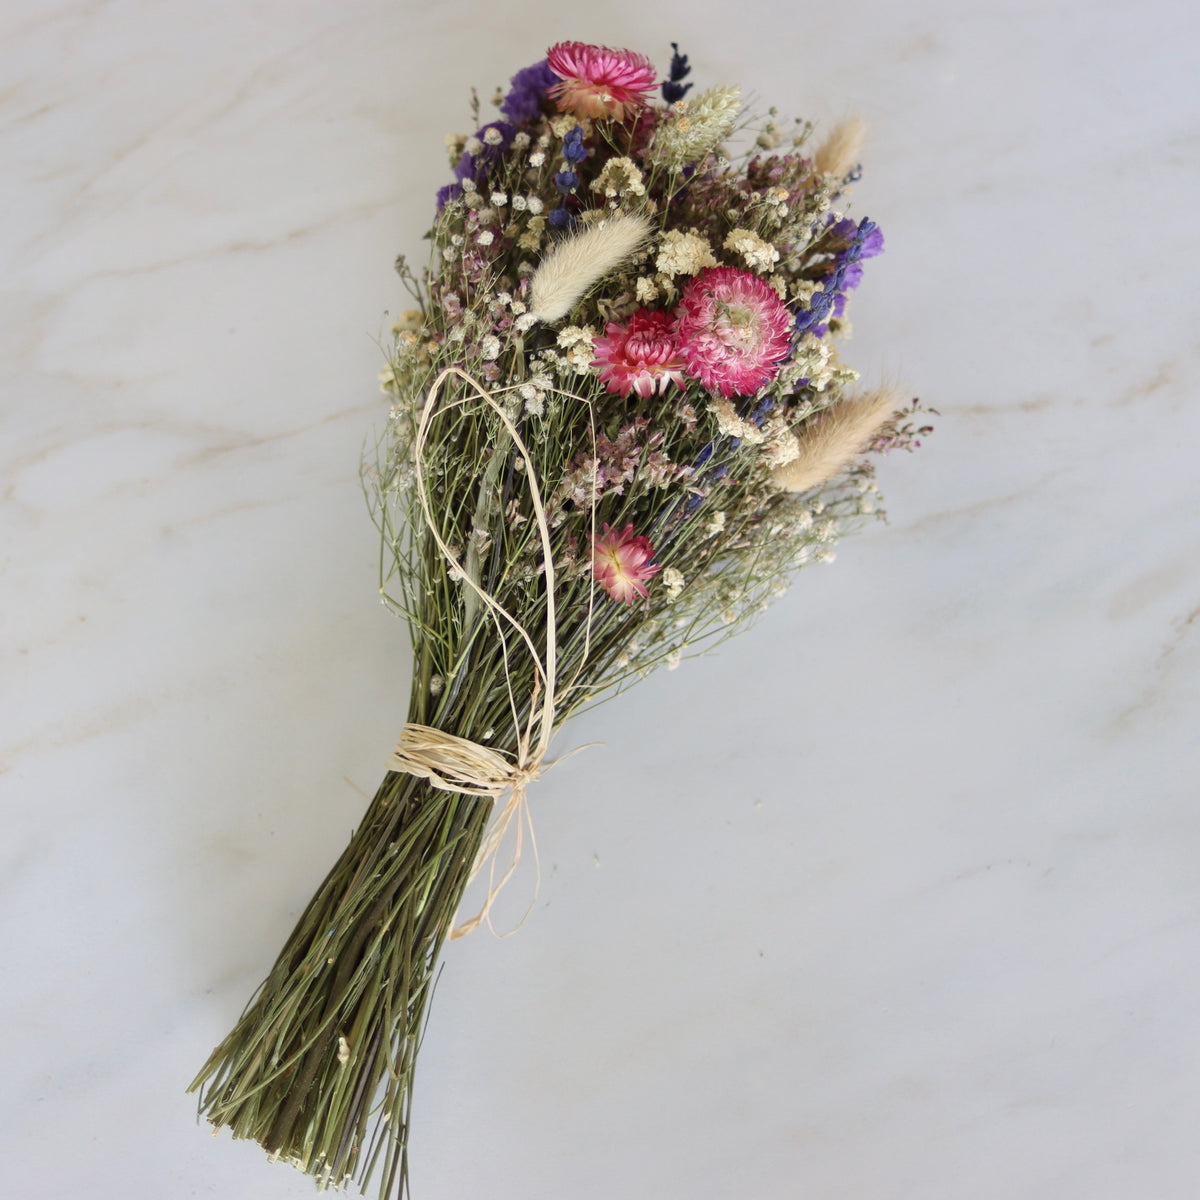 Dried flower bouquet “Rainbow Spring” - flowers as decoration and gift - Holistic Habitat 